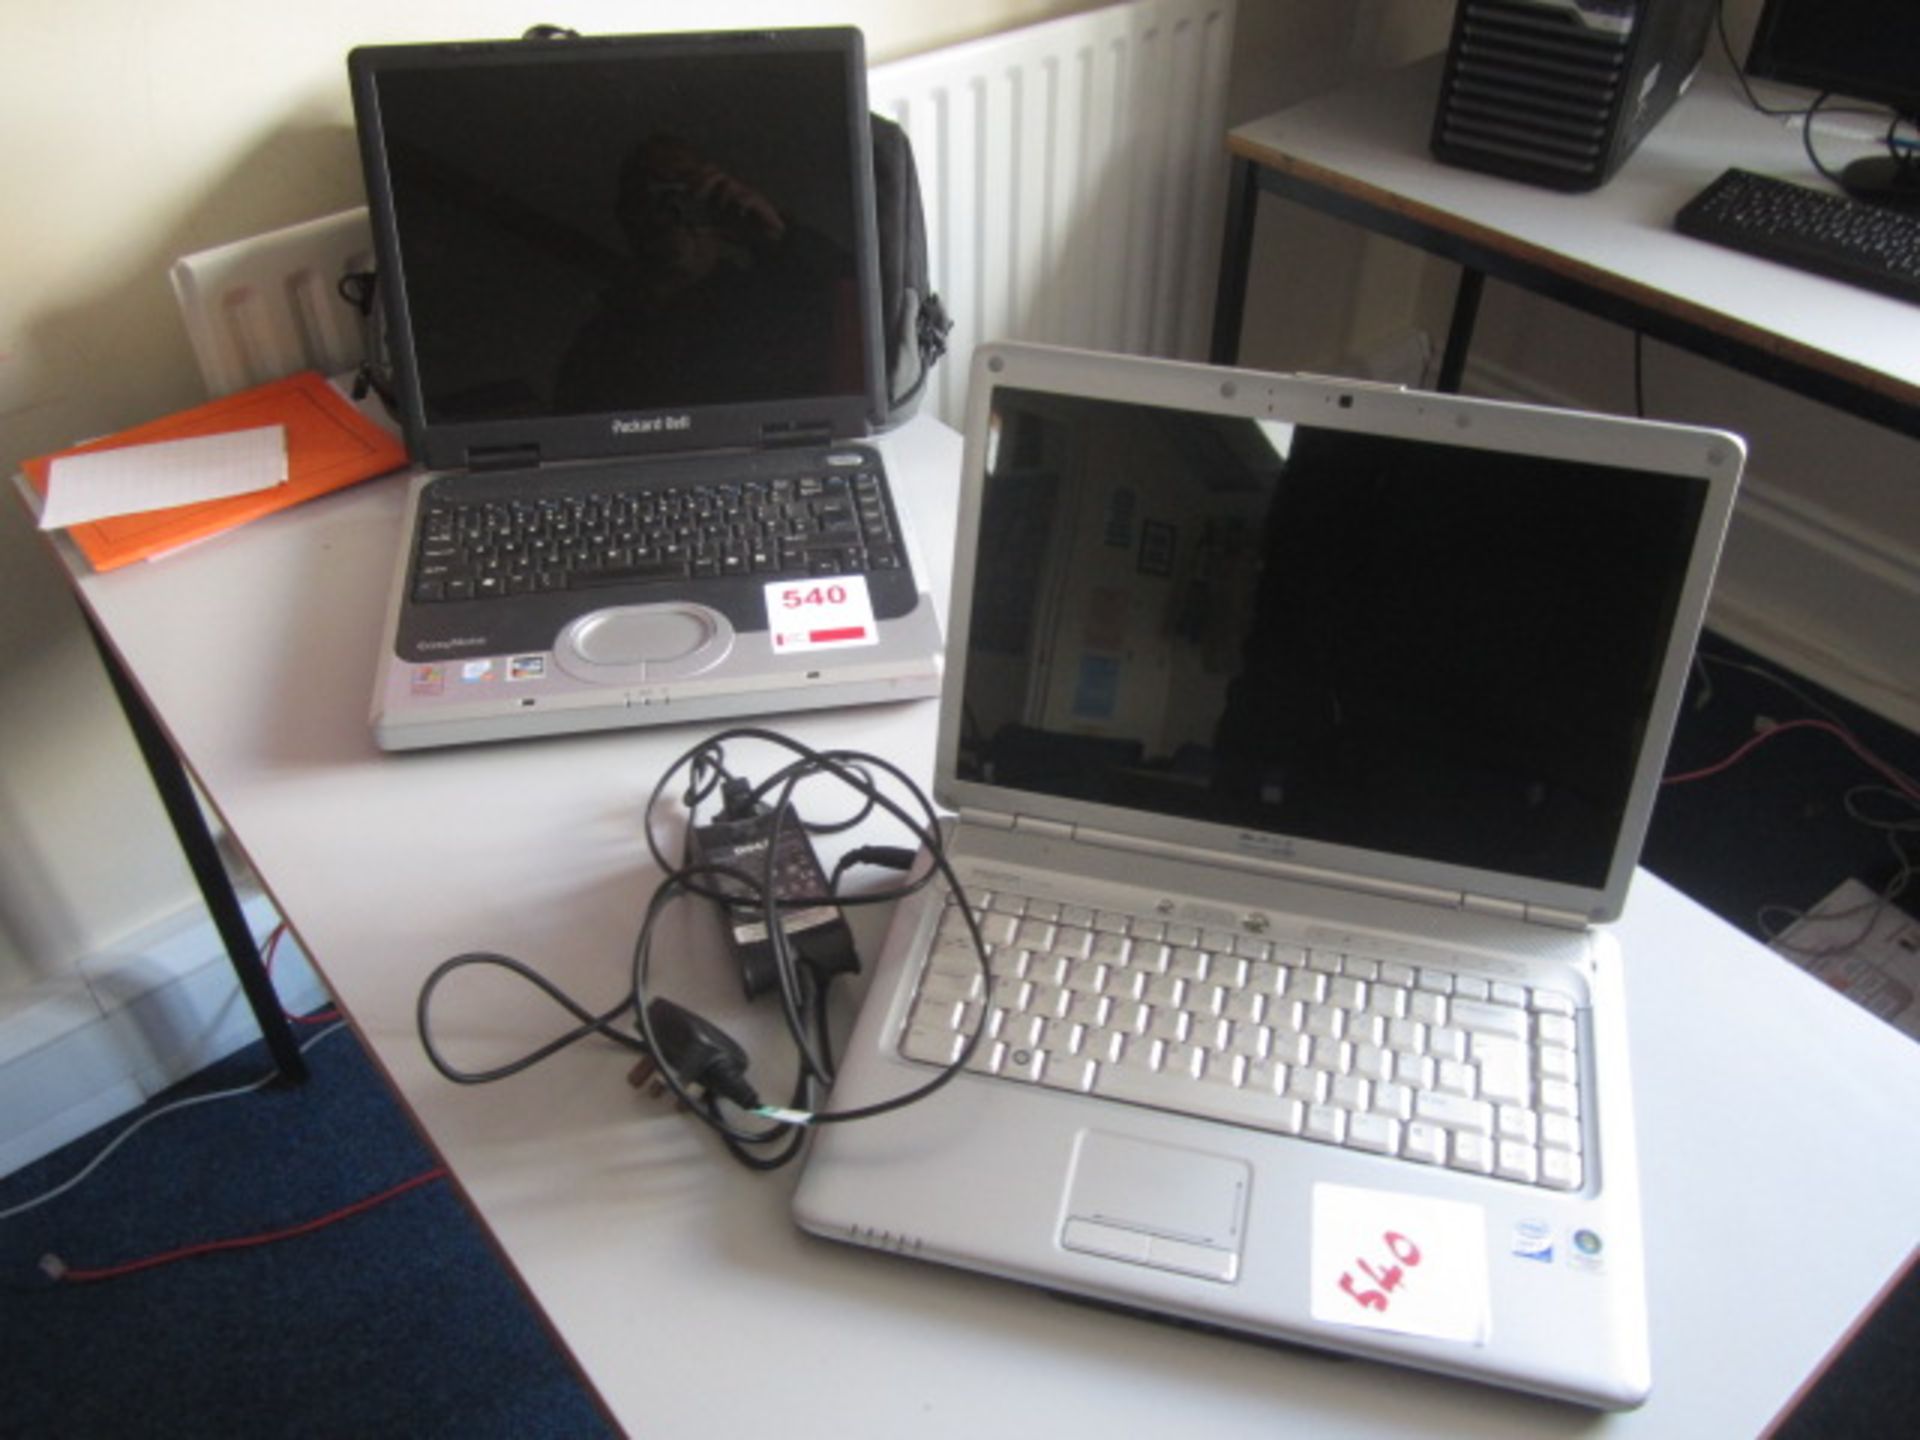 Dell Core i2 and Packard Bell P4 laptops - unsure of working condition. Located at Church FarmPlease